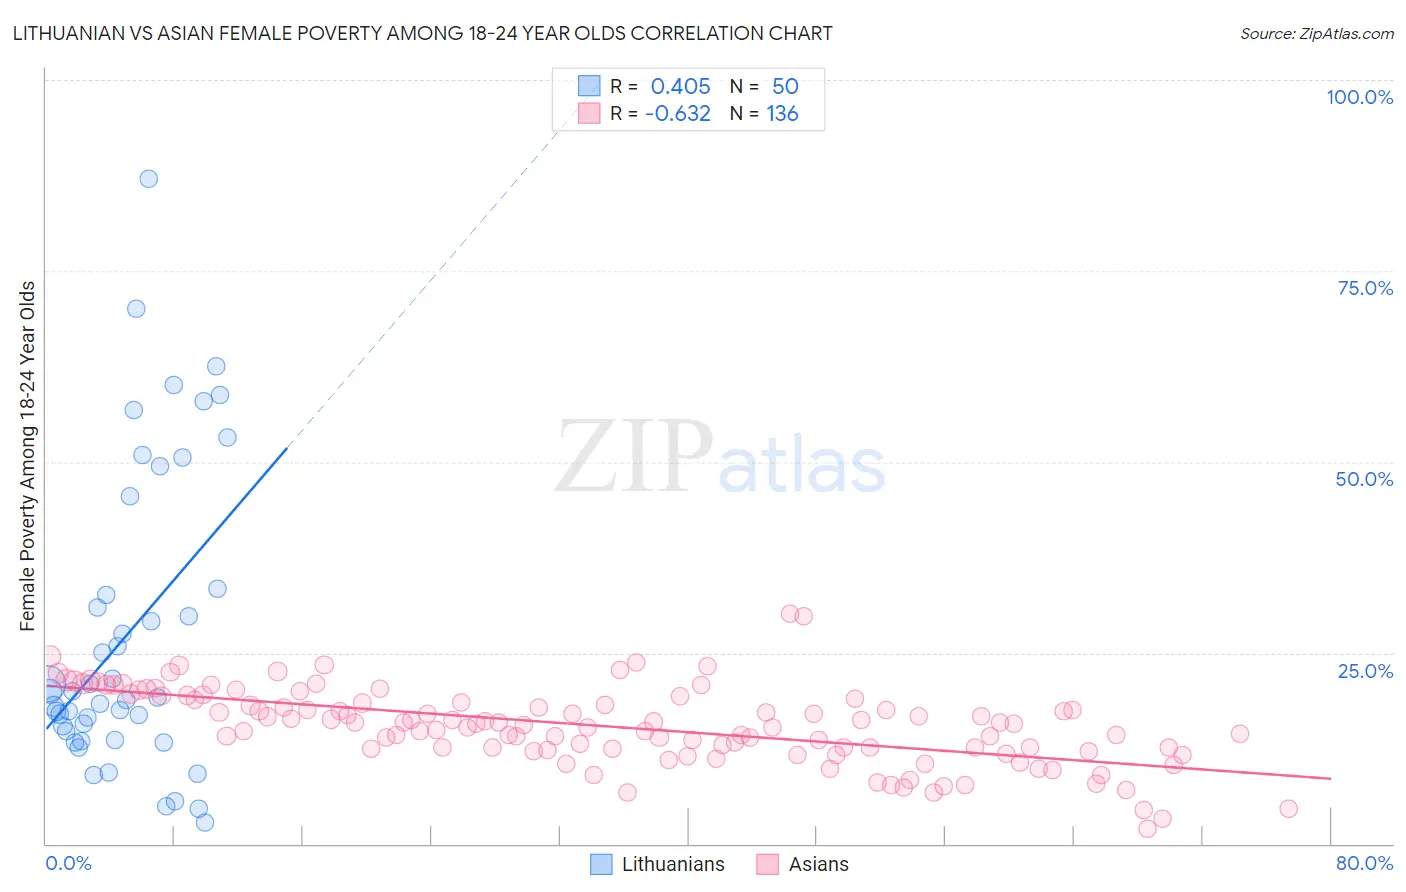 Lithuanian vs Asian Female Poverty Among 18-24 Year Olds